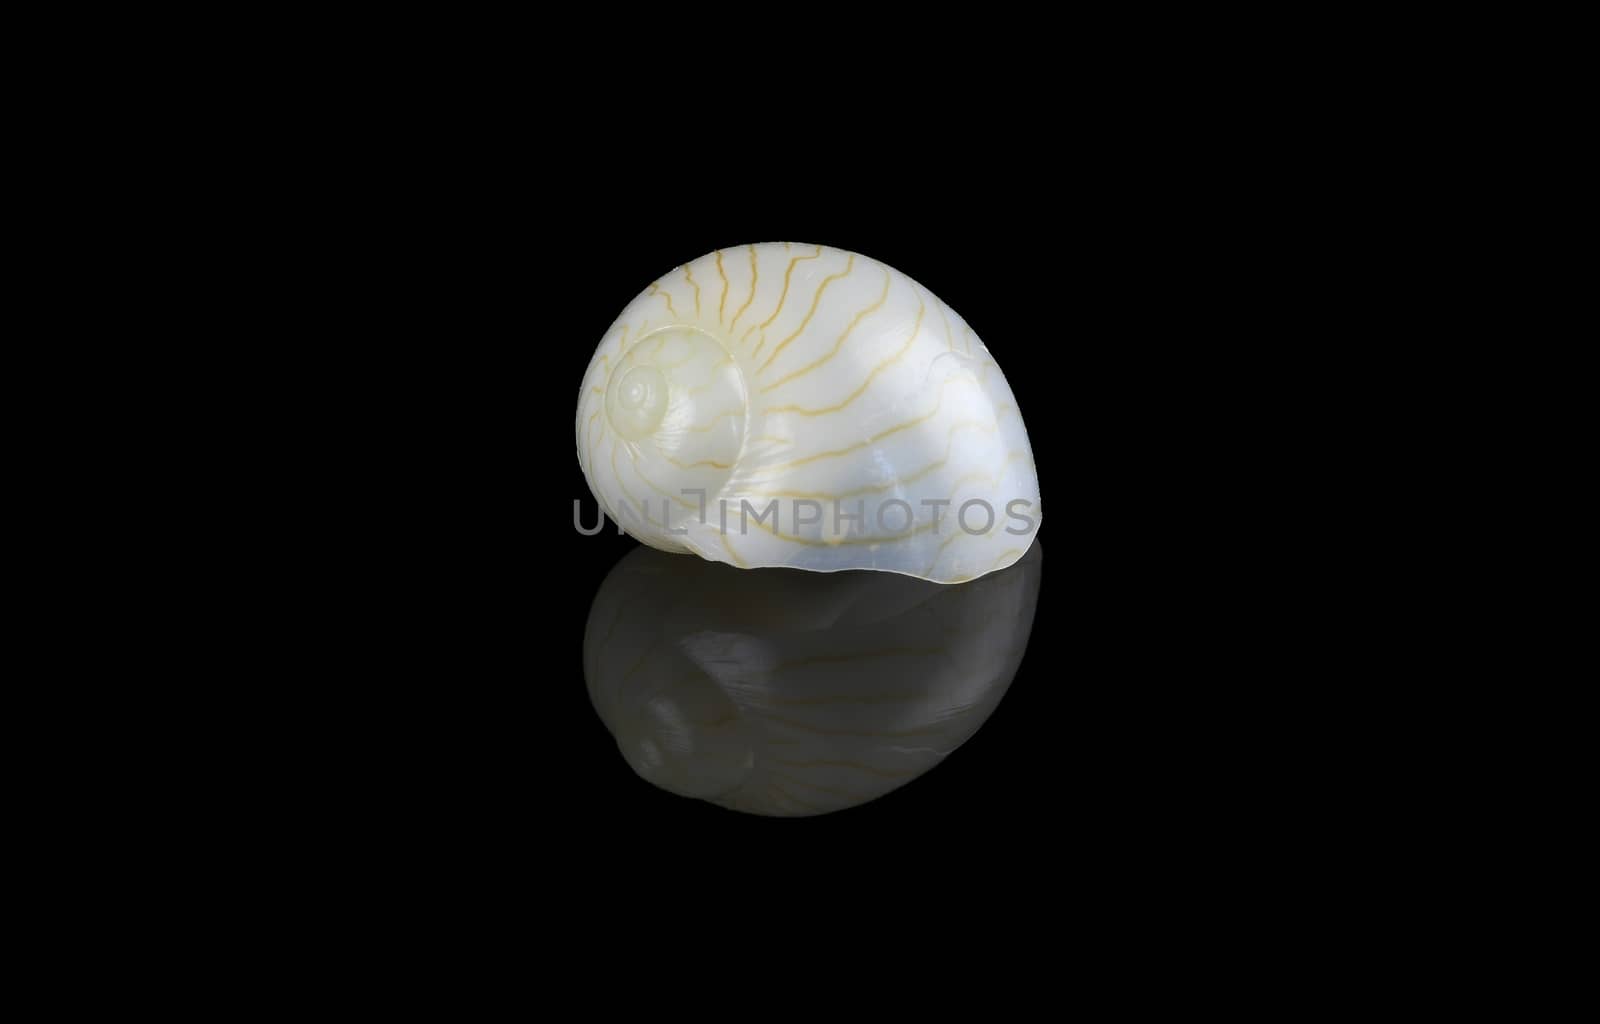 Moon shell isolated on black background. It is a marine predatory sea snail and a mollusk in the family Naticidea, Size is L2,6xH1,4xW1,75 cm